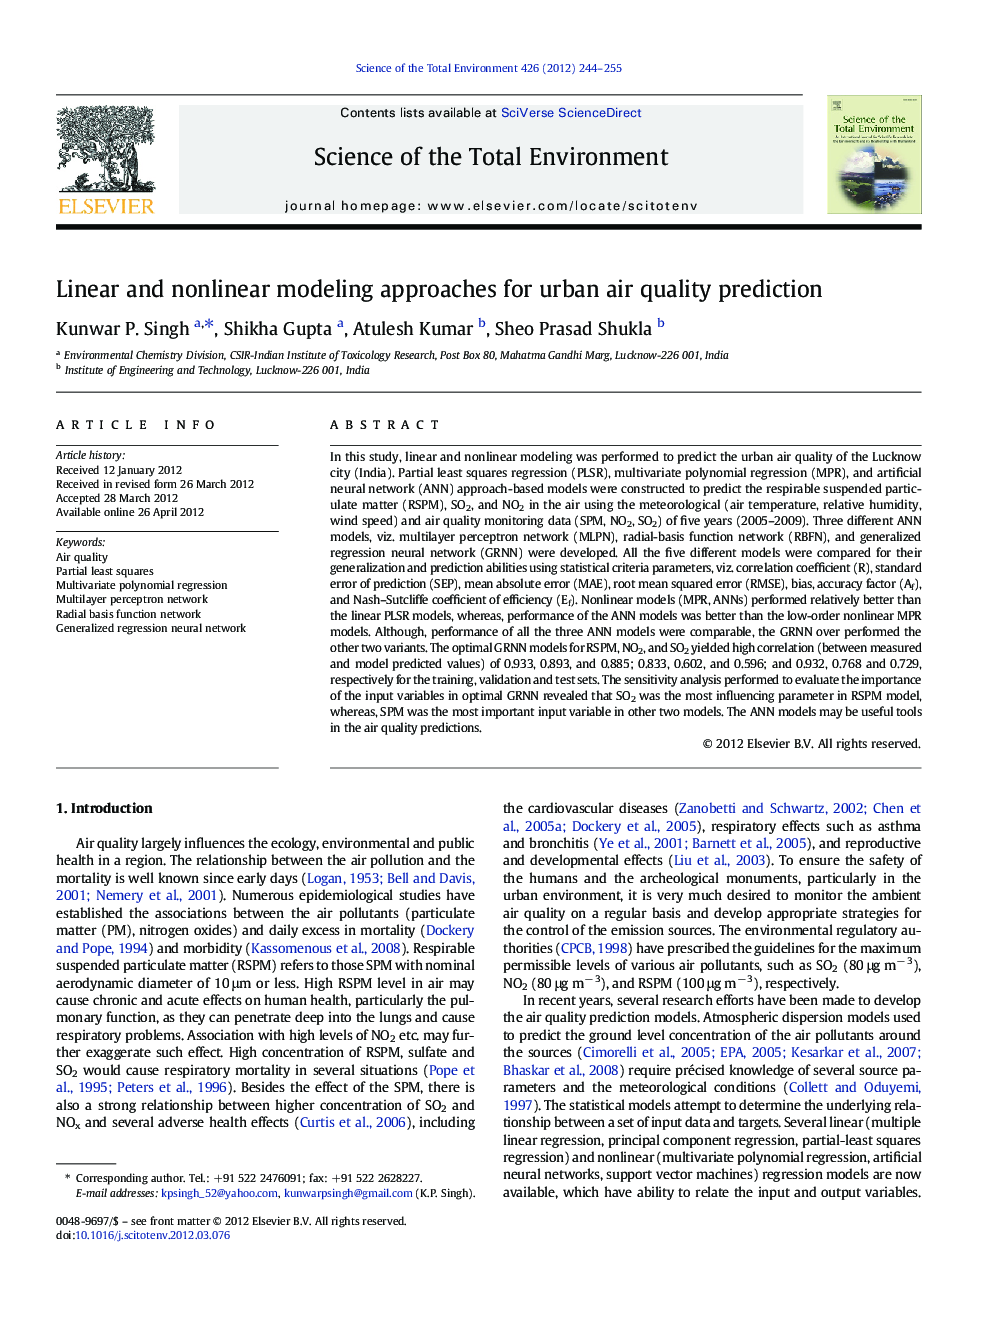 Linear and nonlinear modeling approaches for urban air quality prediction